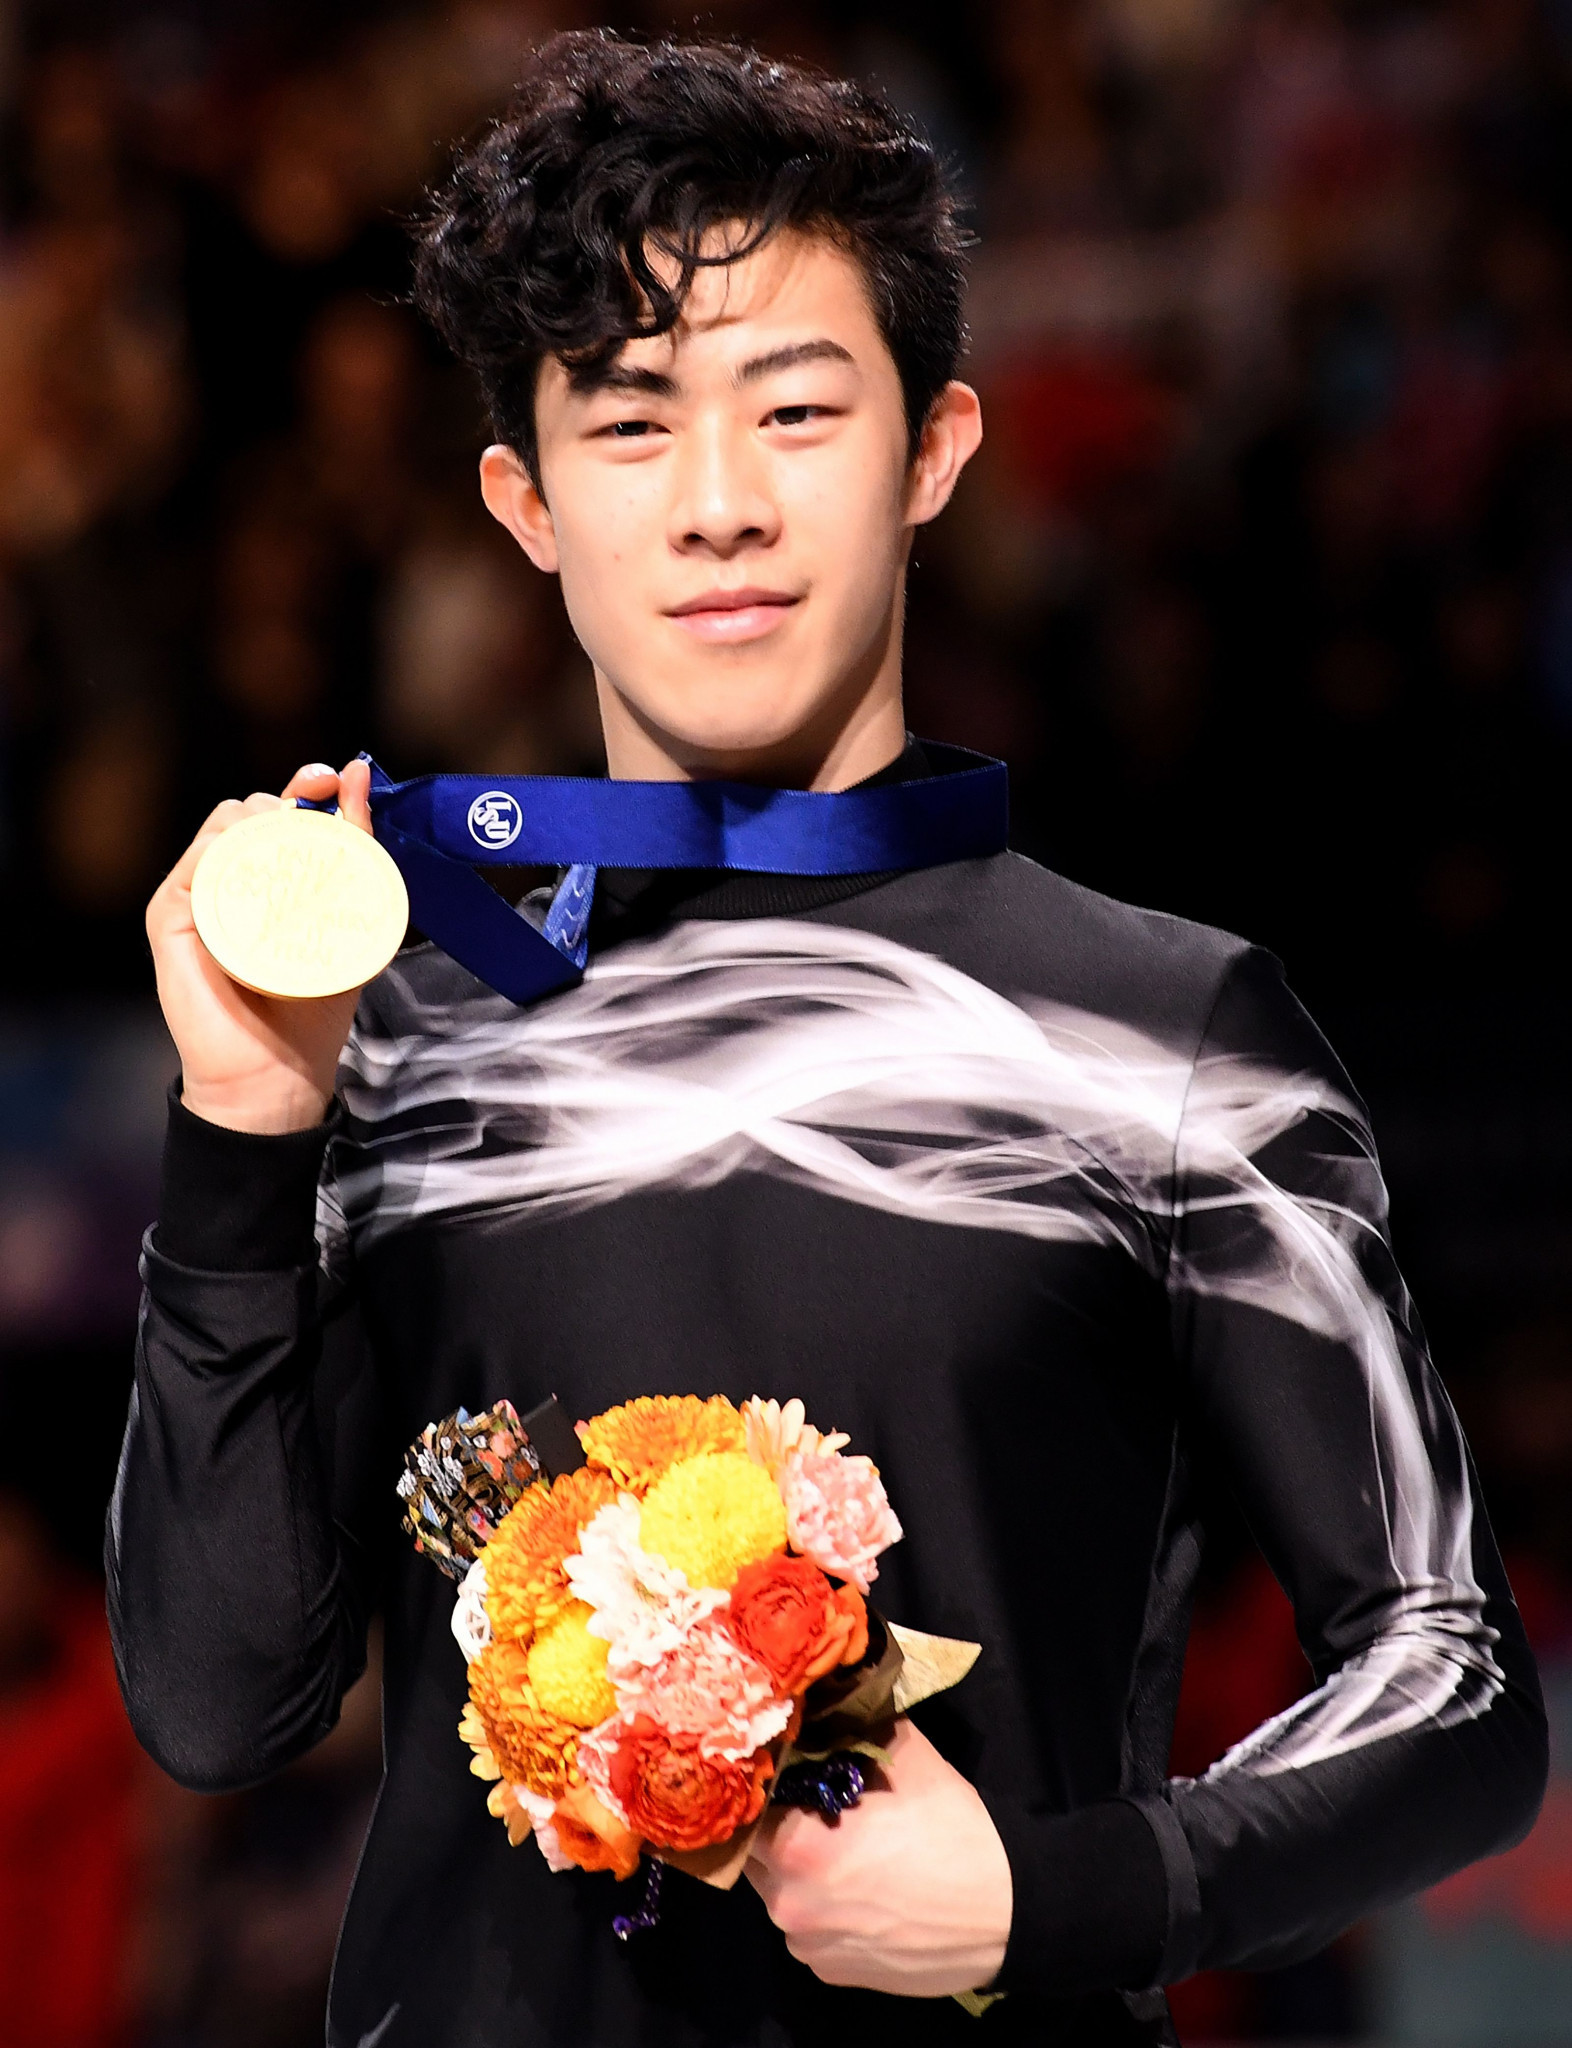 American Nathan Chen retained his men's title at this year's International Skating Union World Figure Skating Championships in Saitama in Japan and will be seeking a hat-trick at Montreal in 2020 ©Getty Images